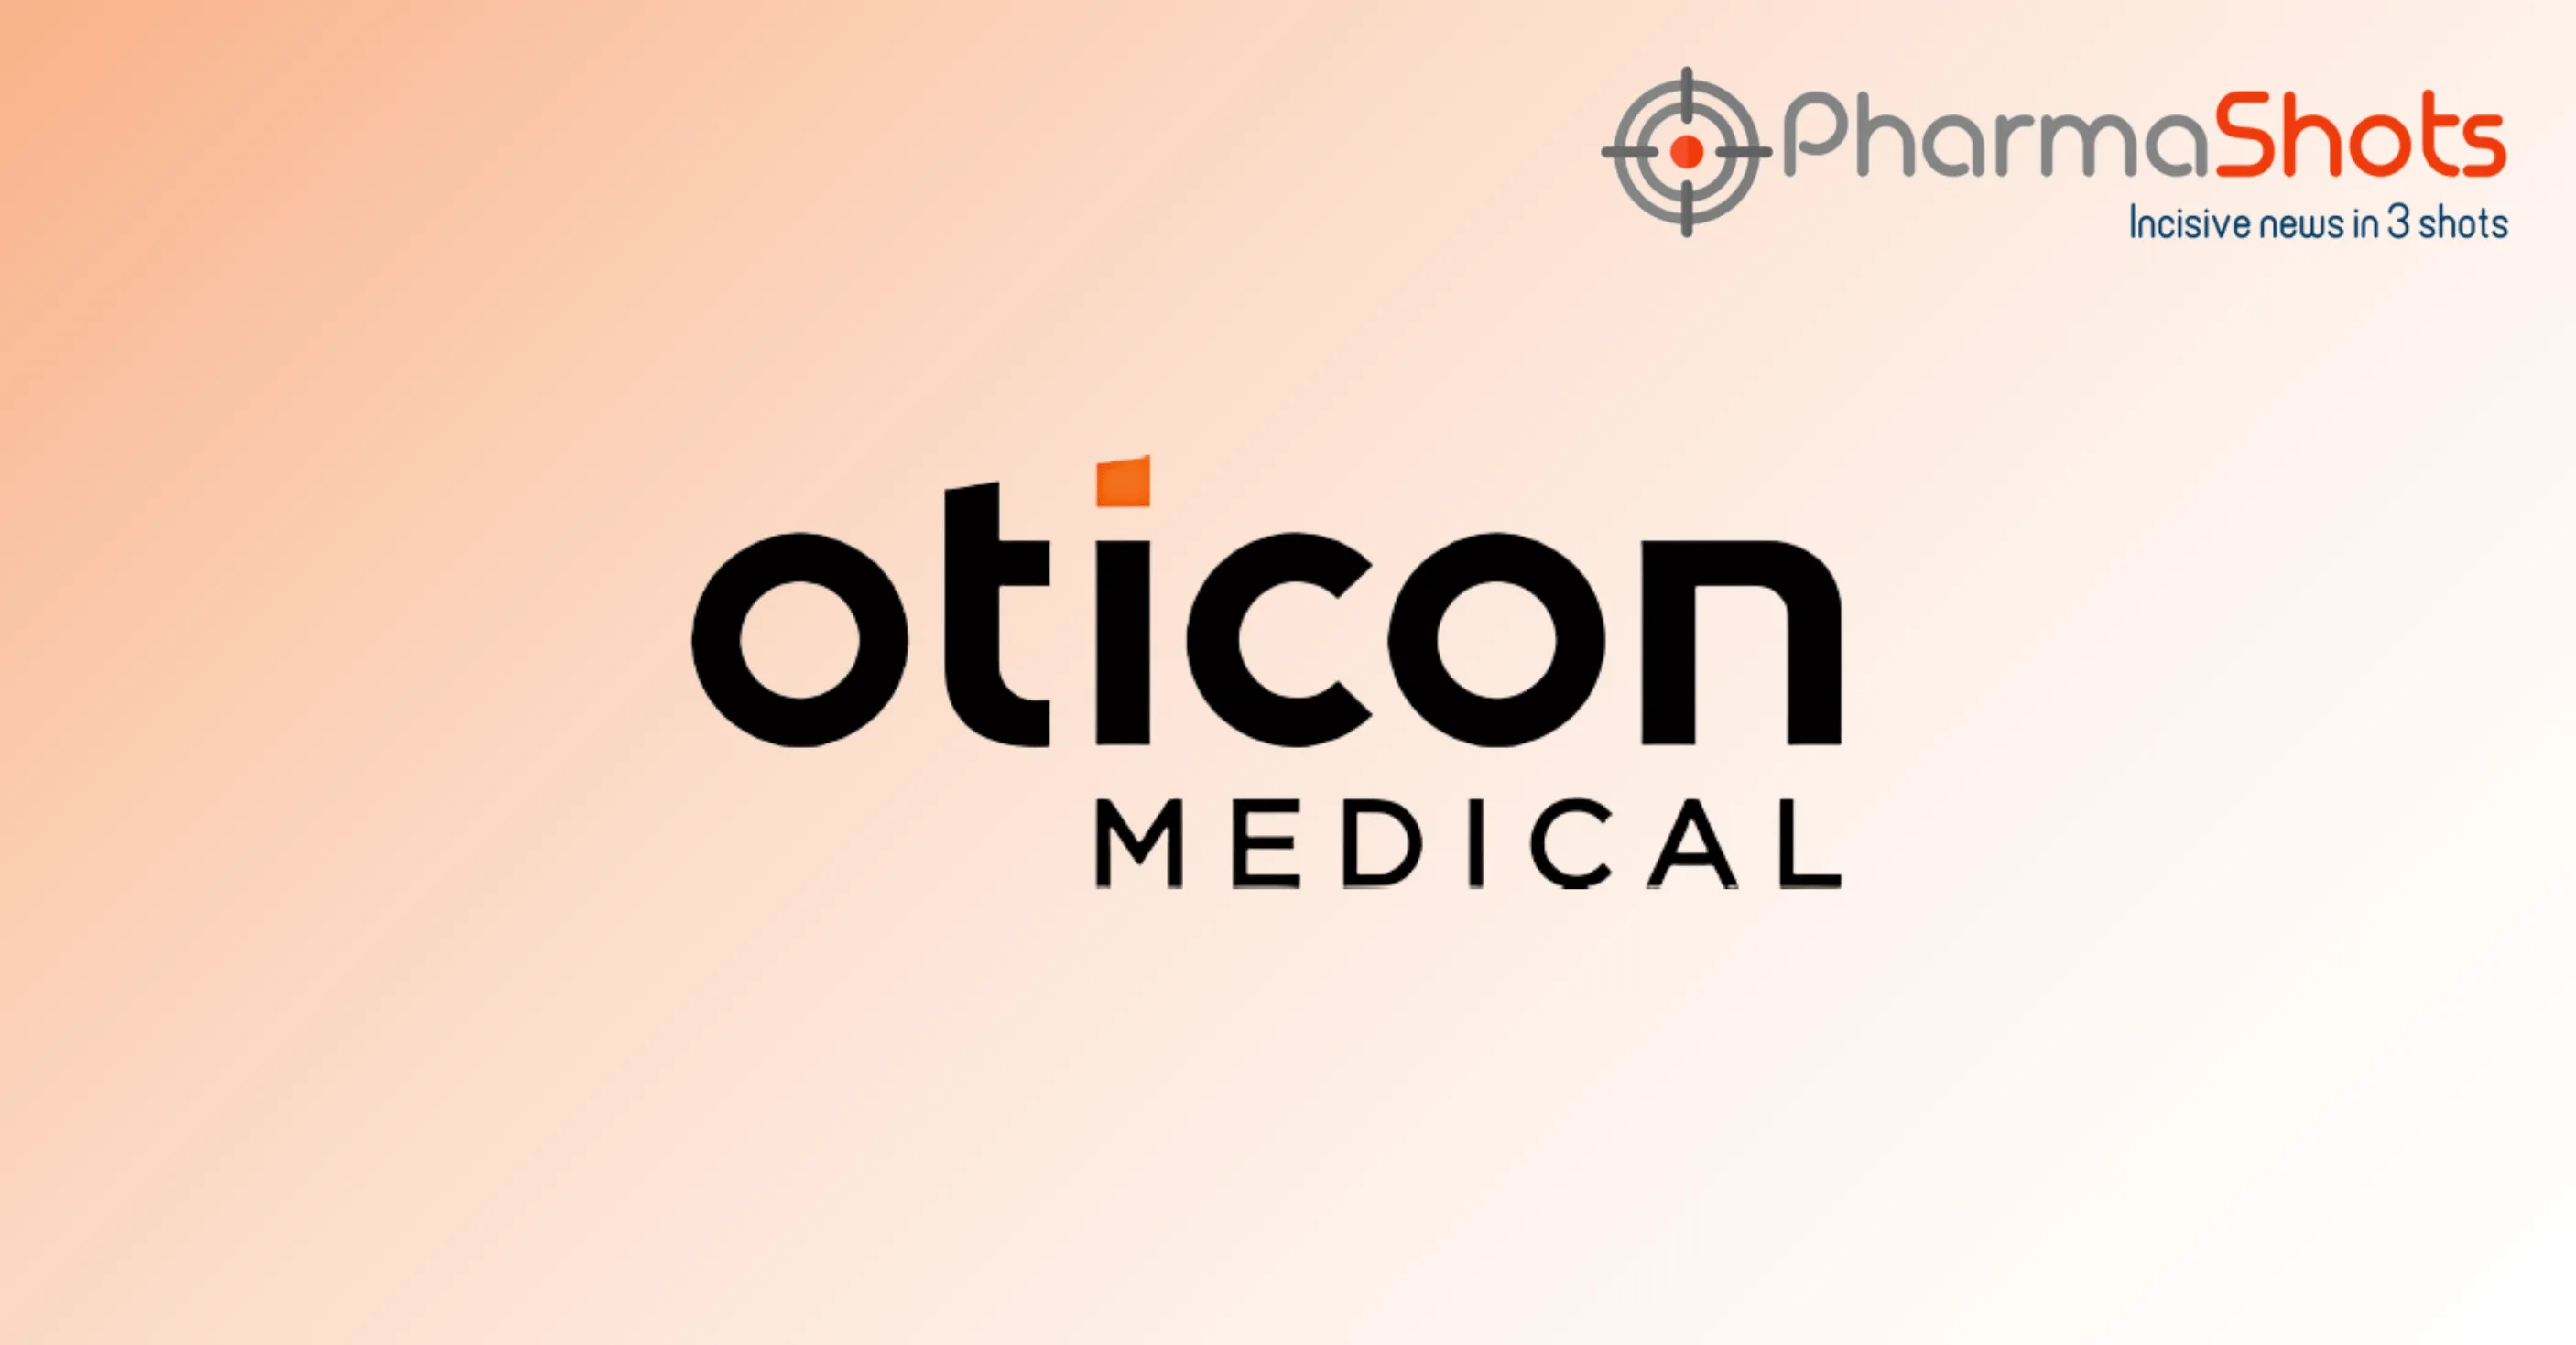 Oticon Medical Reports the US FDA’s Clearance of its Bone Conduction Hearing System